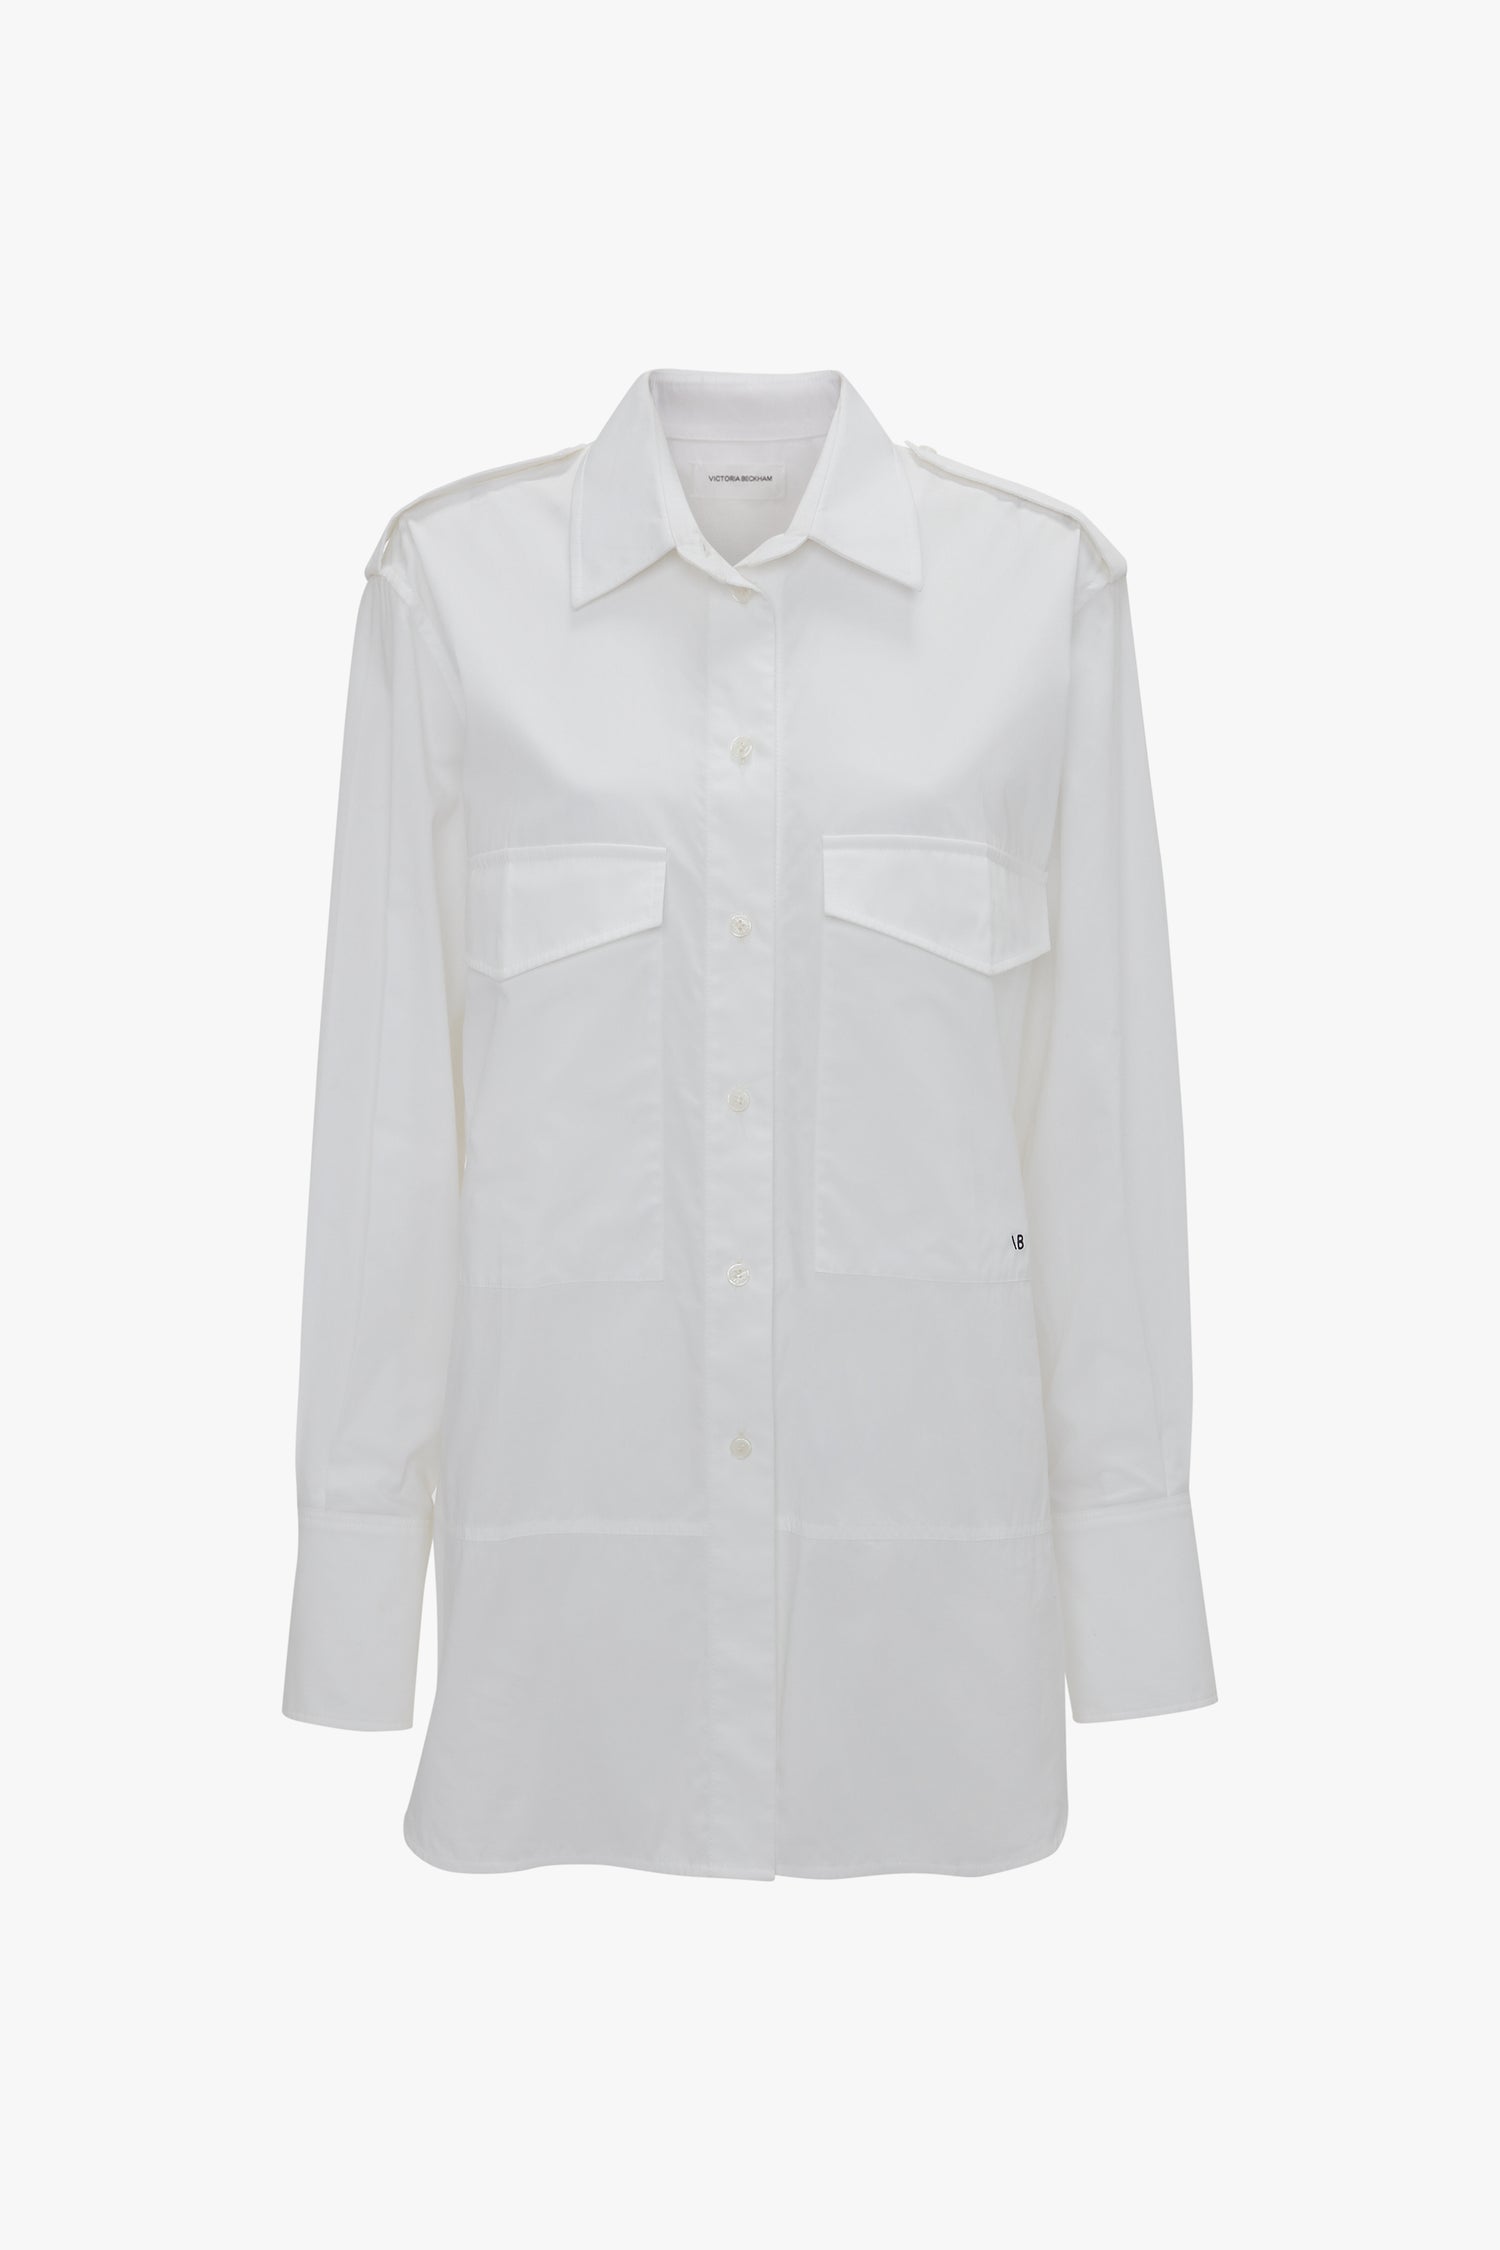 Image of a long-sleeve white button-up shirt with two chest pockets and a pointed collar, crafted from organic cotton. The Oversized Pocket Shirt In White by Victoria Beckham.